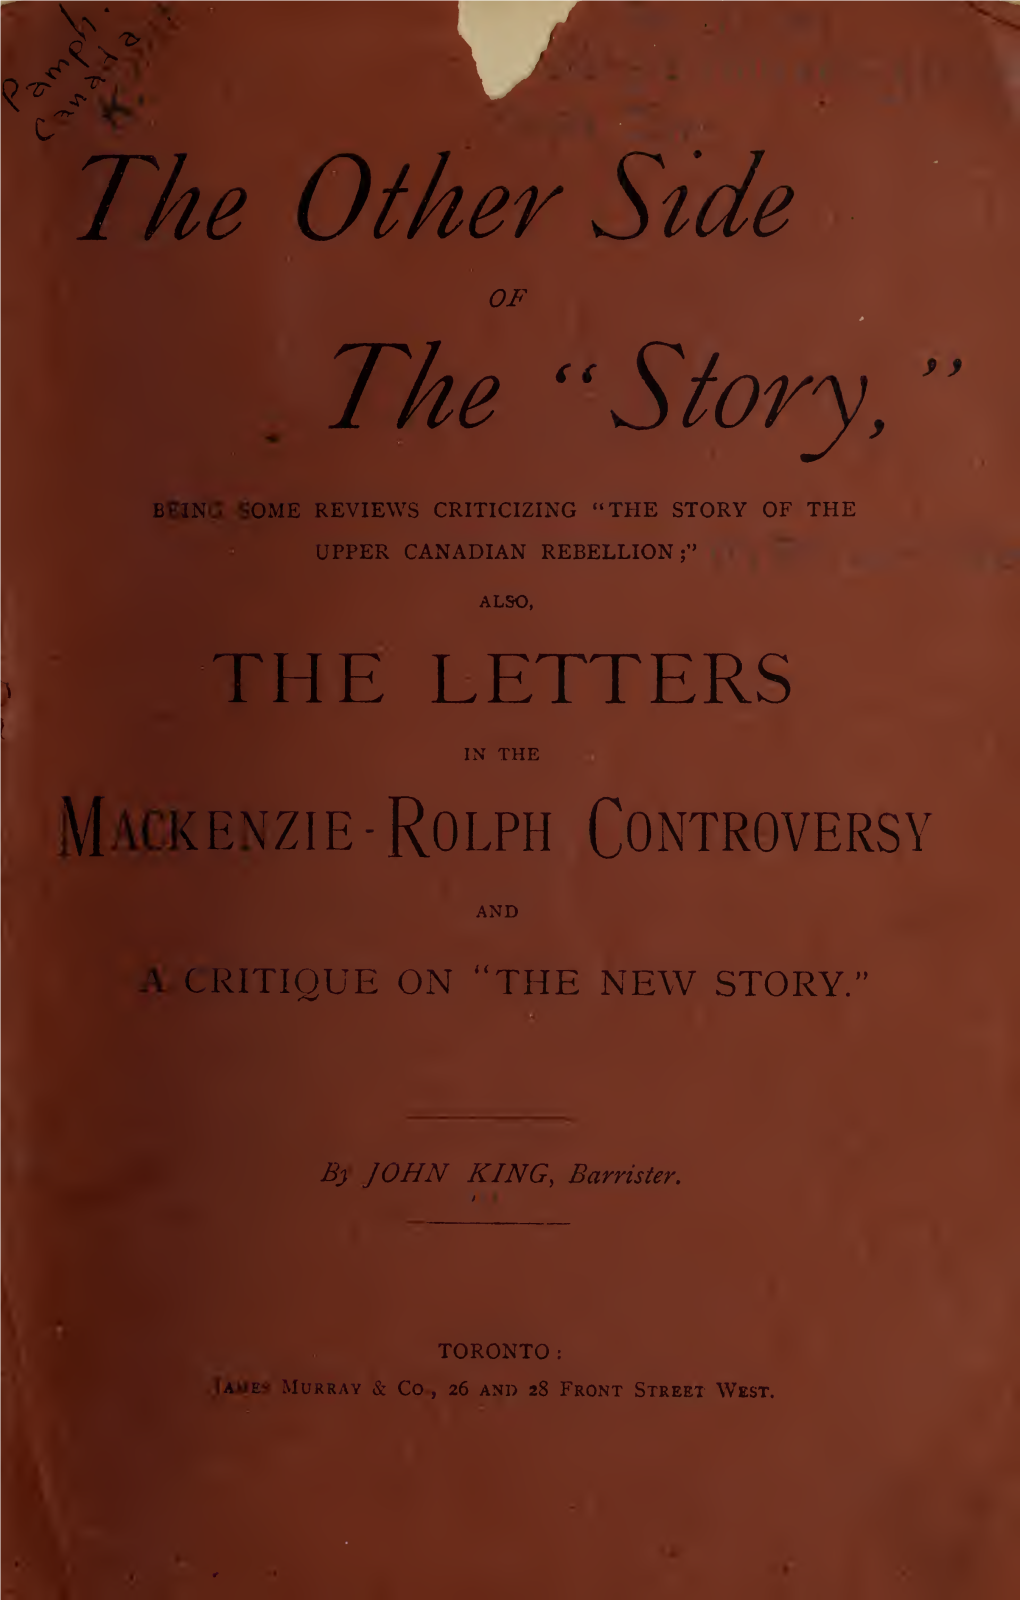 The Other Side of the "Story", Being Some Reviews of Mr. J.C. Dent's First